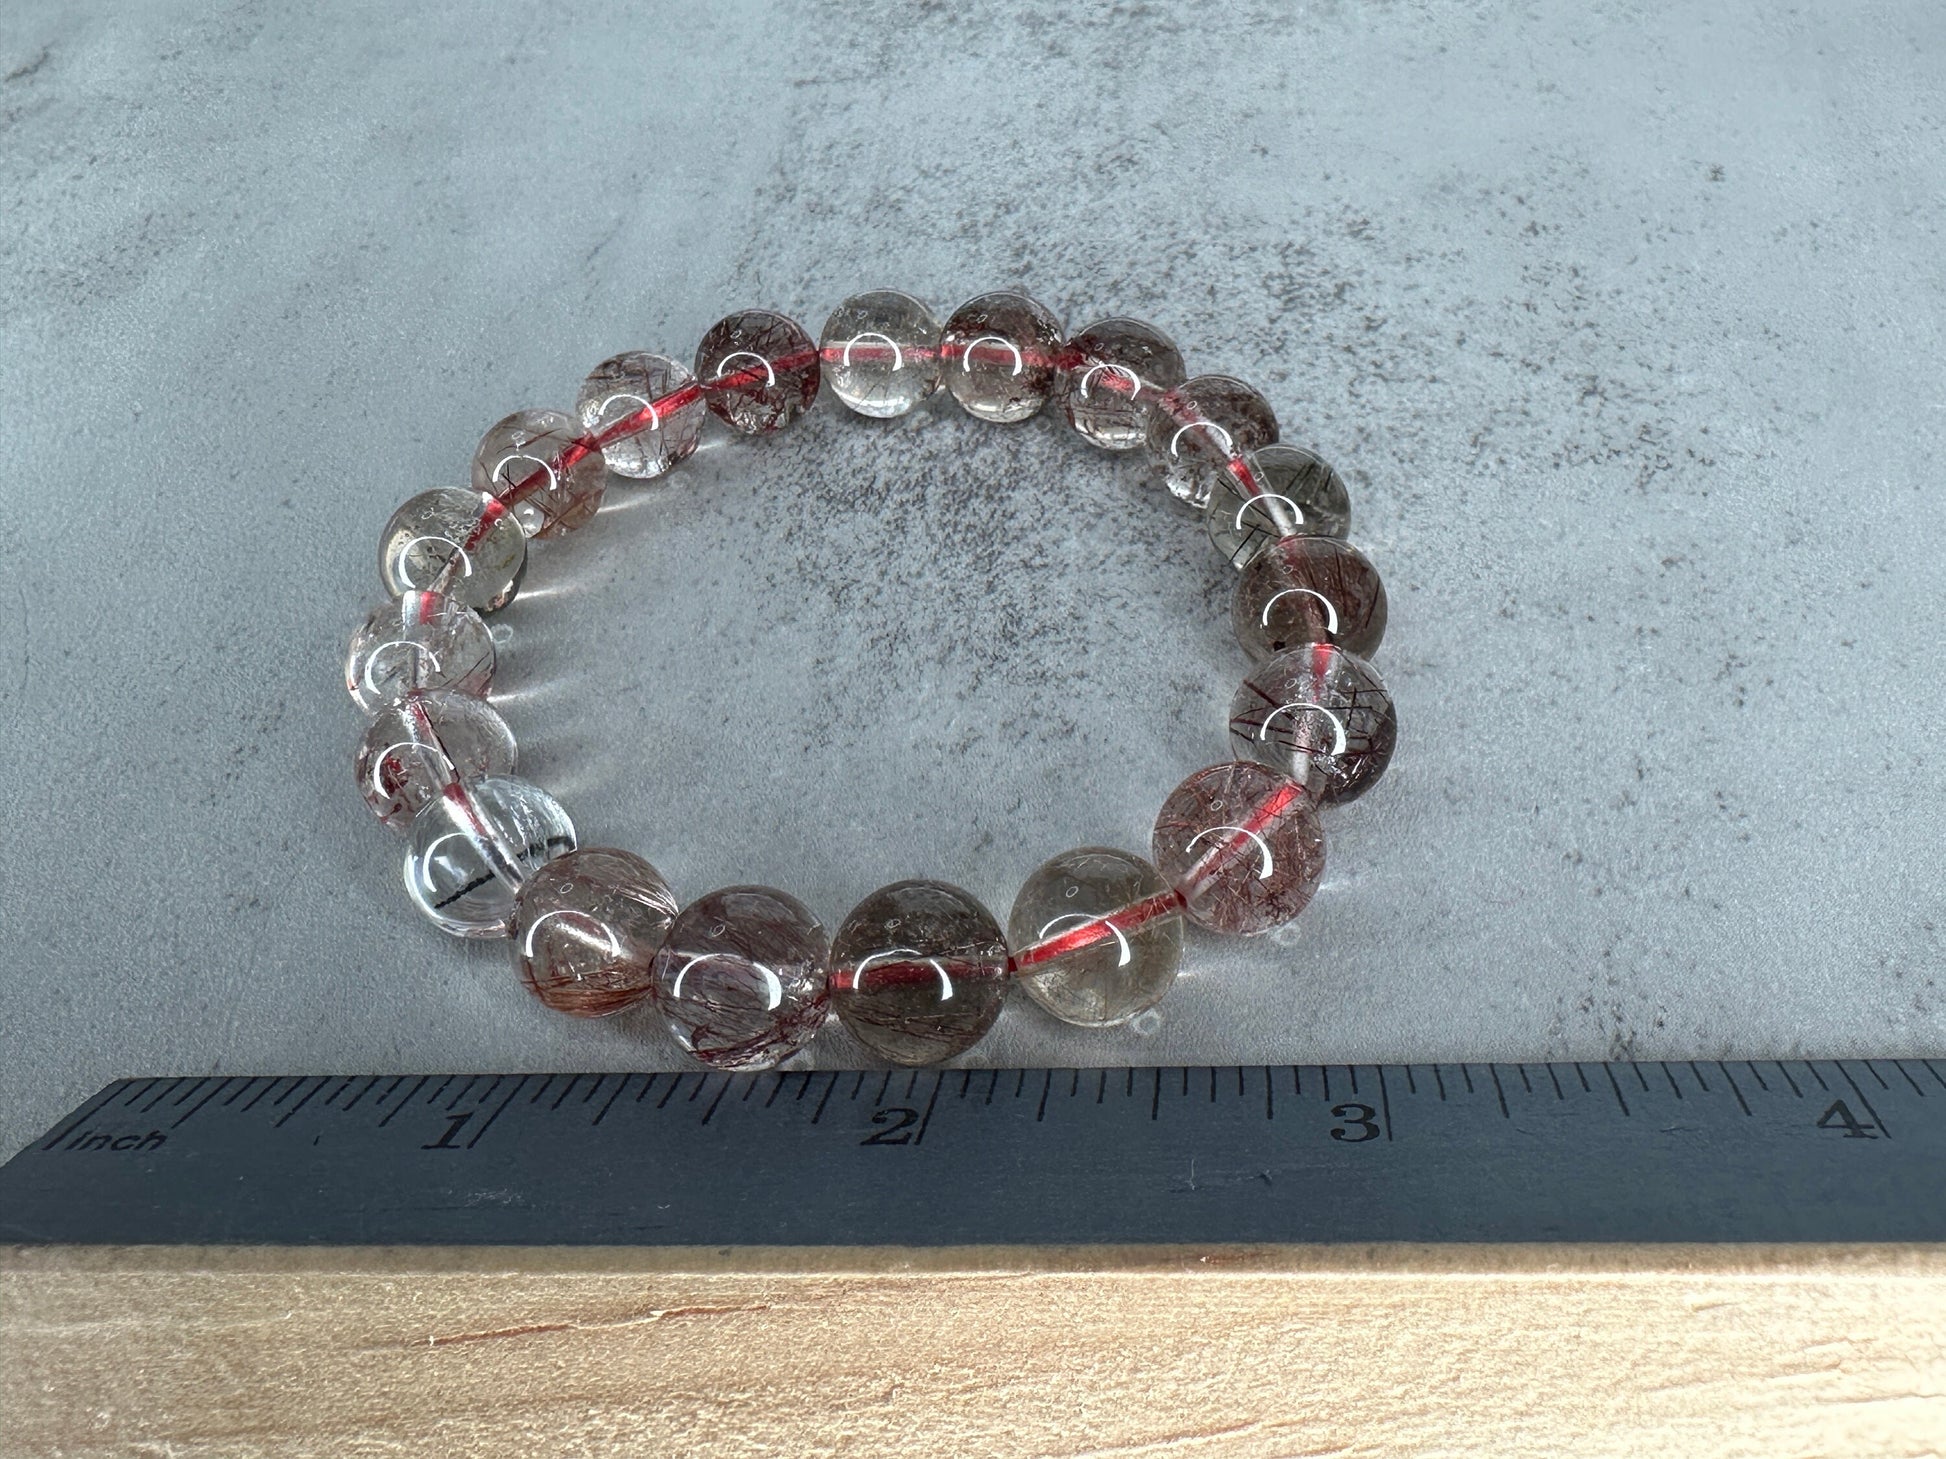 AAA+ Mixed Rutile Crystal Bracelet High-Quality Genuine Rutilated Quartz With Amazing Clarity In 10.6mm